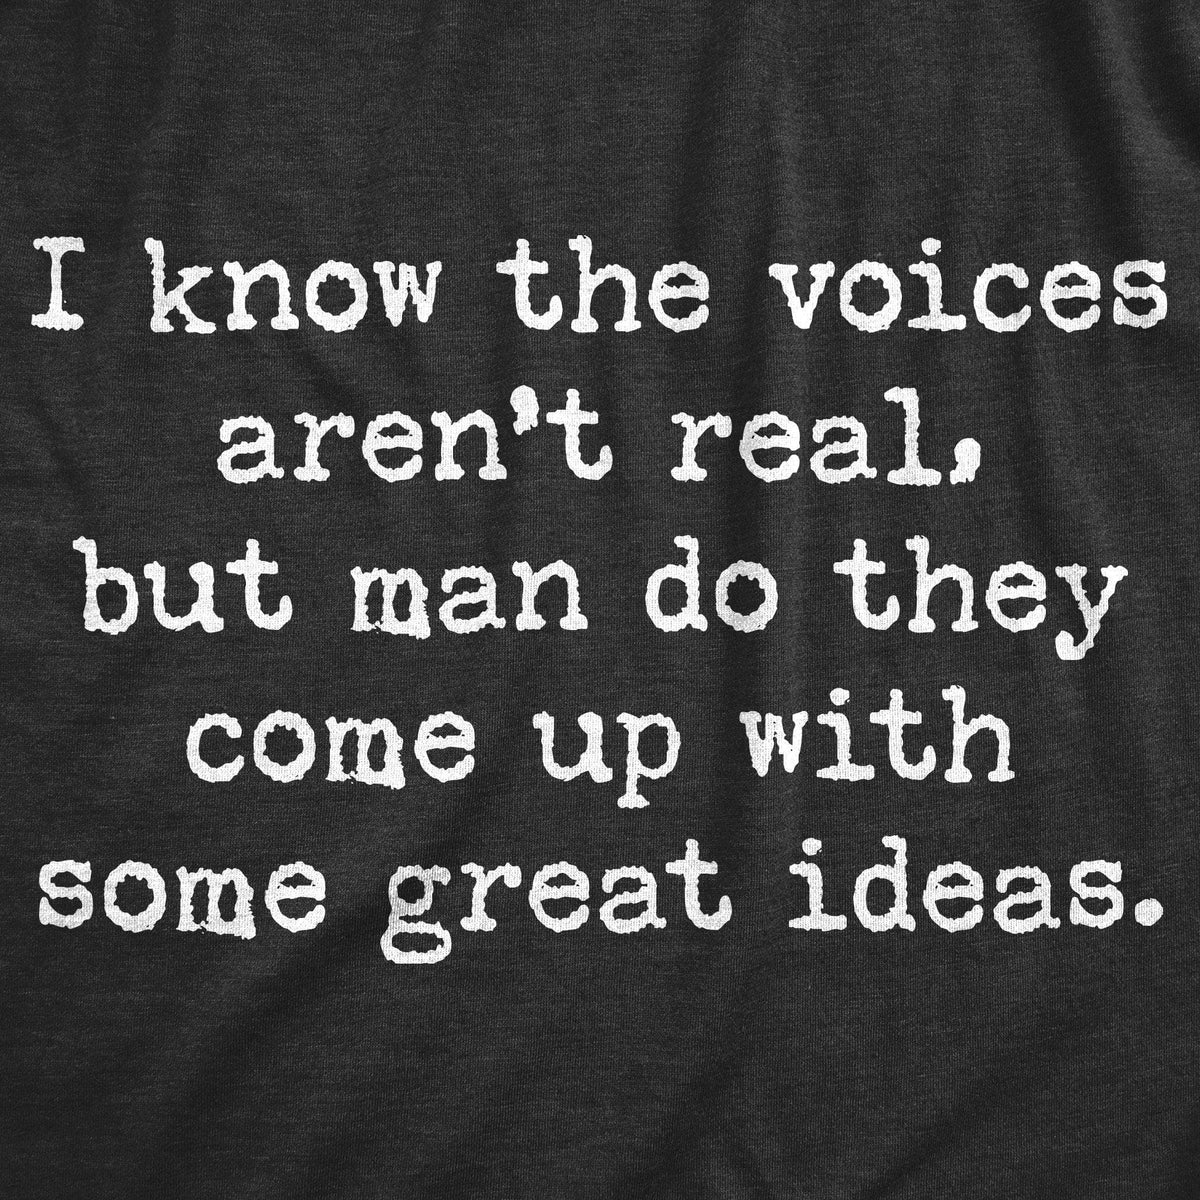 I Know The Voices Aren&#39;t Real Men&#39;s Tshirt - Crazy Dog T-Shirts